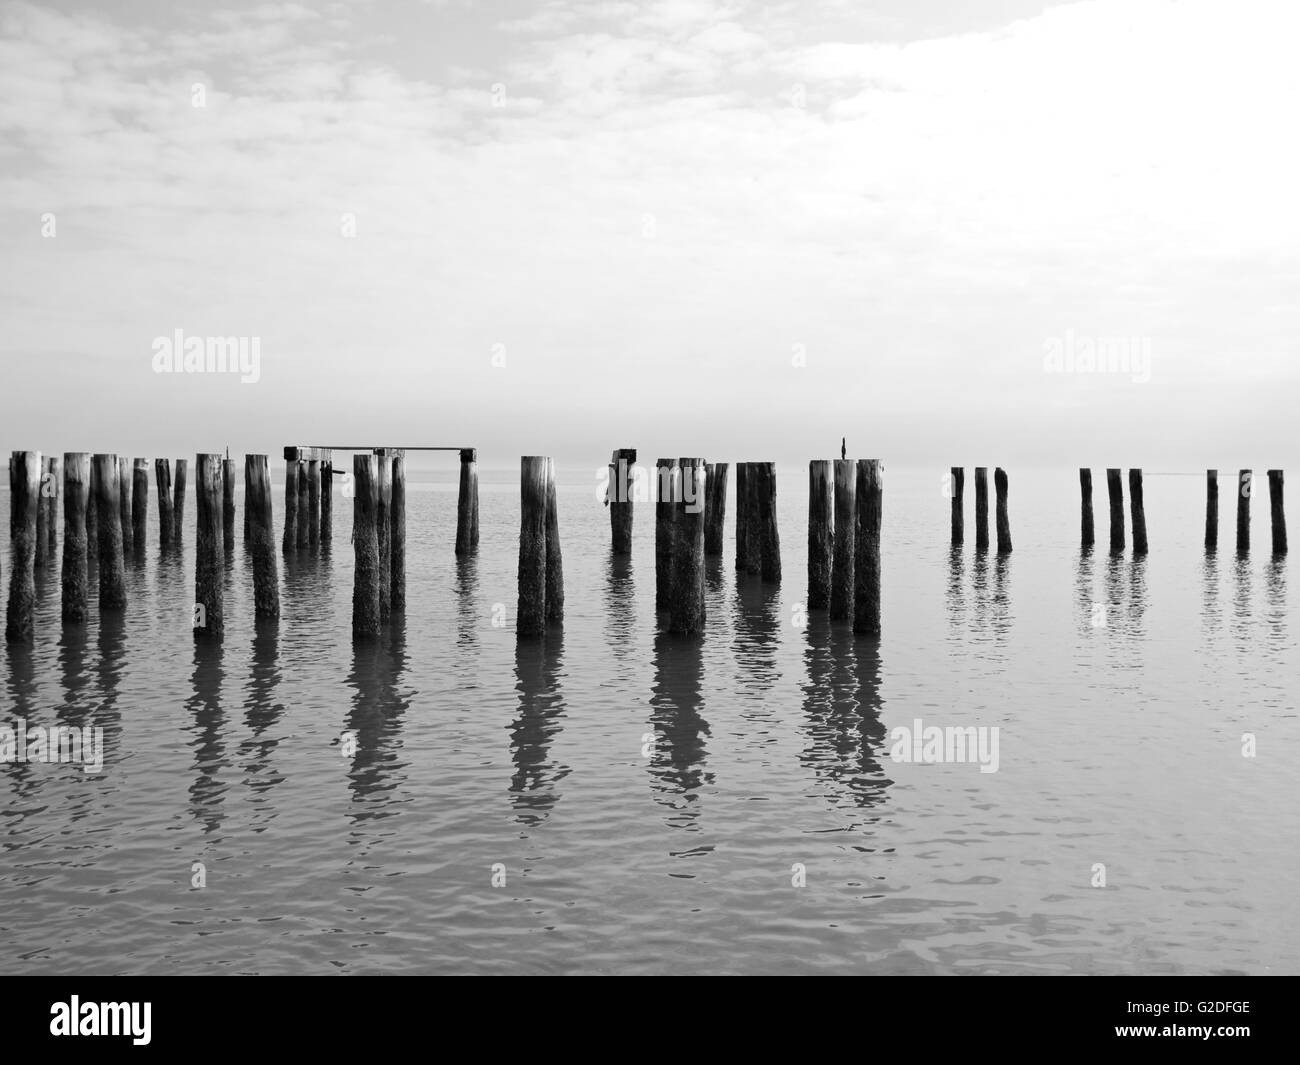 Old Wood Pilings in Water Stock Photo